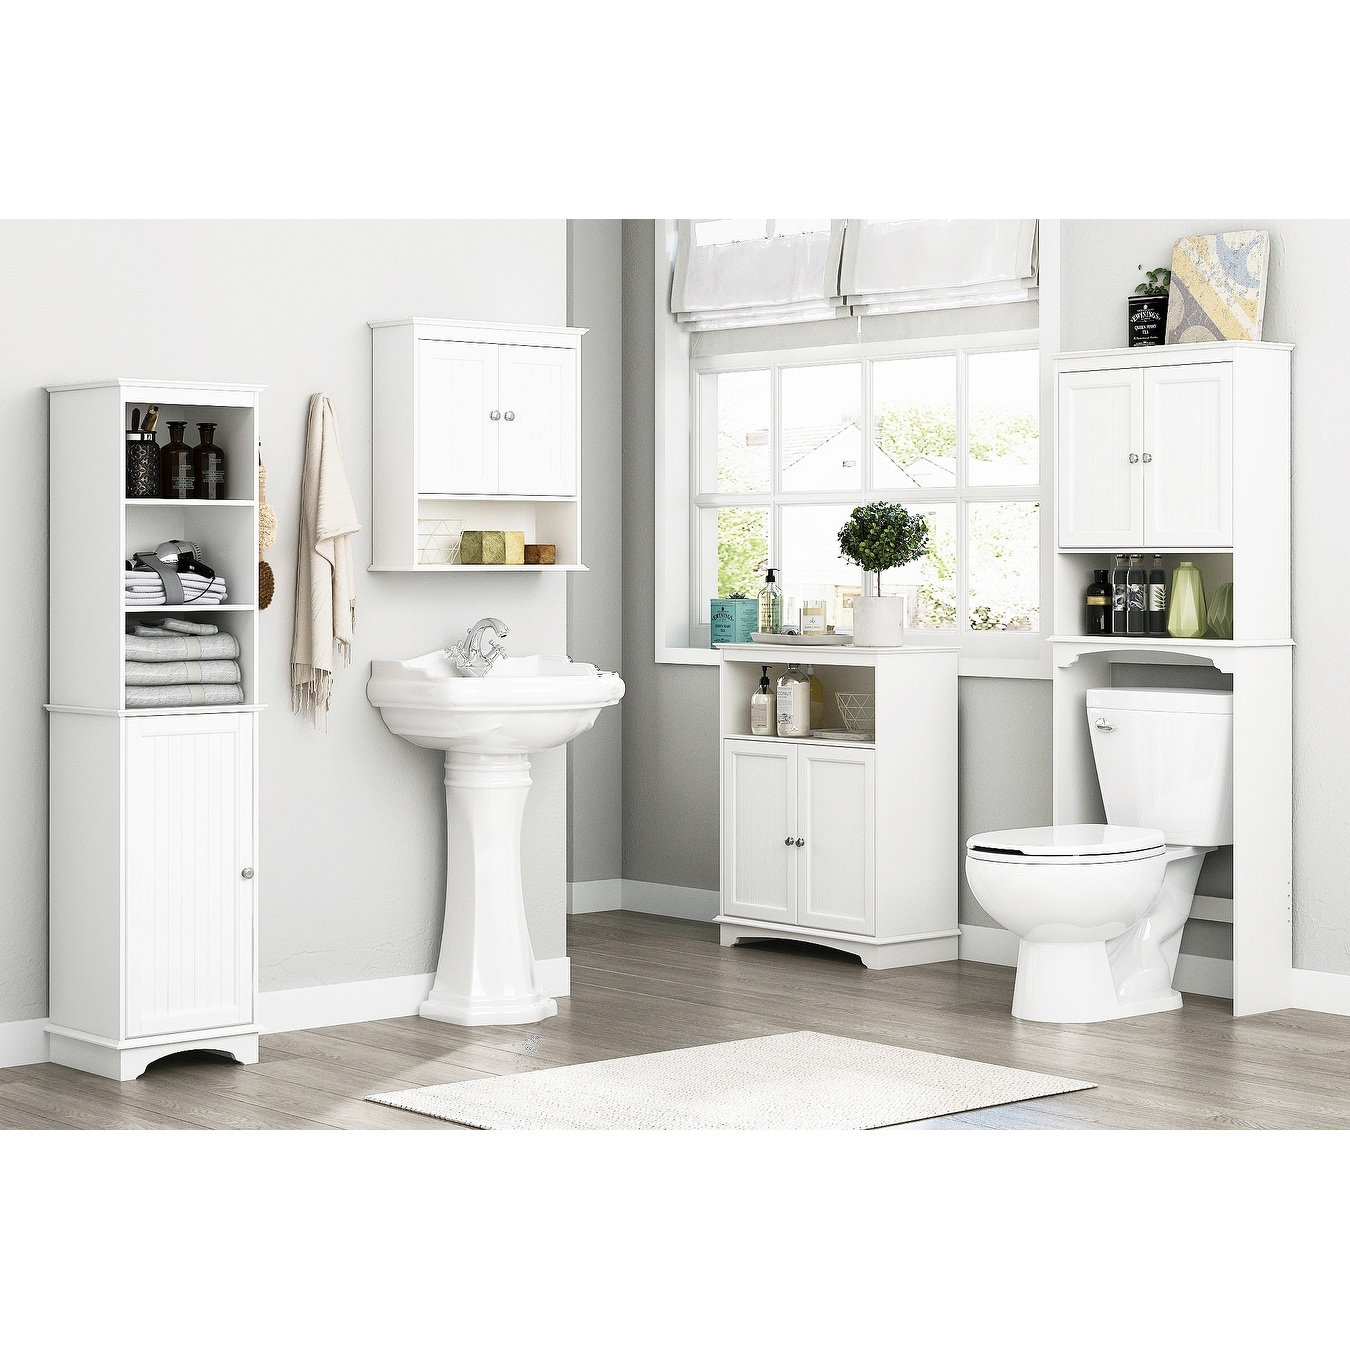 https://ak1.ostkcdn.com/images/products/is/images/direct/1ea3d28162ade10bb1429742d273c1d05727c8e3/Spirich-Home-Bathroom-Two-Doo-Wall-Cabinet%2C-Wood-Hanging-Cabinet%2C-Wall-Cabinets-with-Doors-and-Shelves-Over-The-Toilet%2C-White.jpg